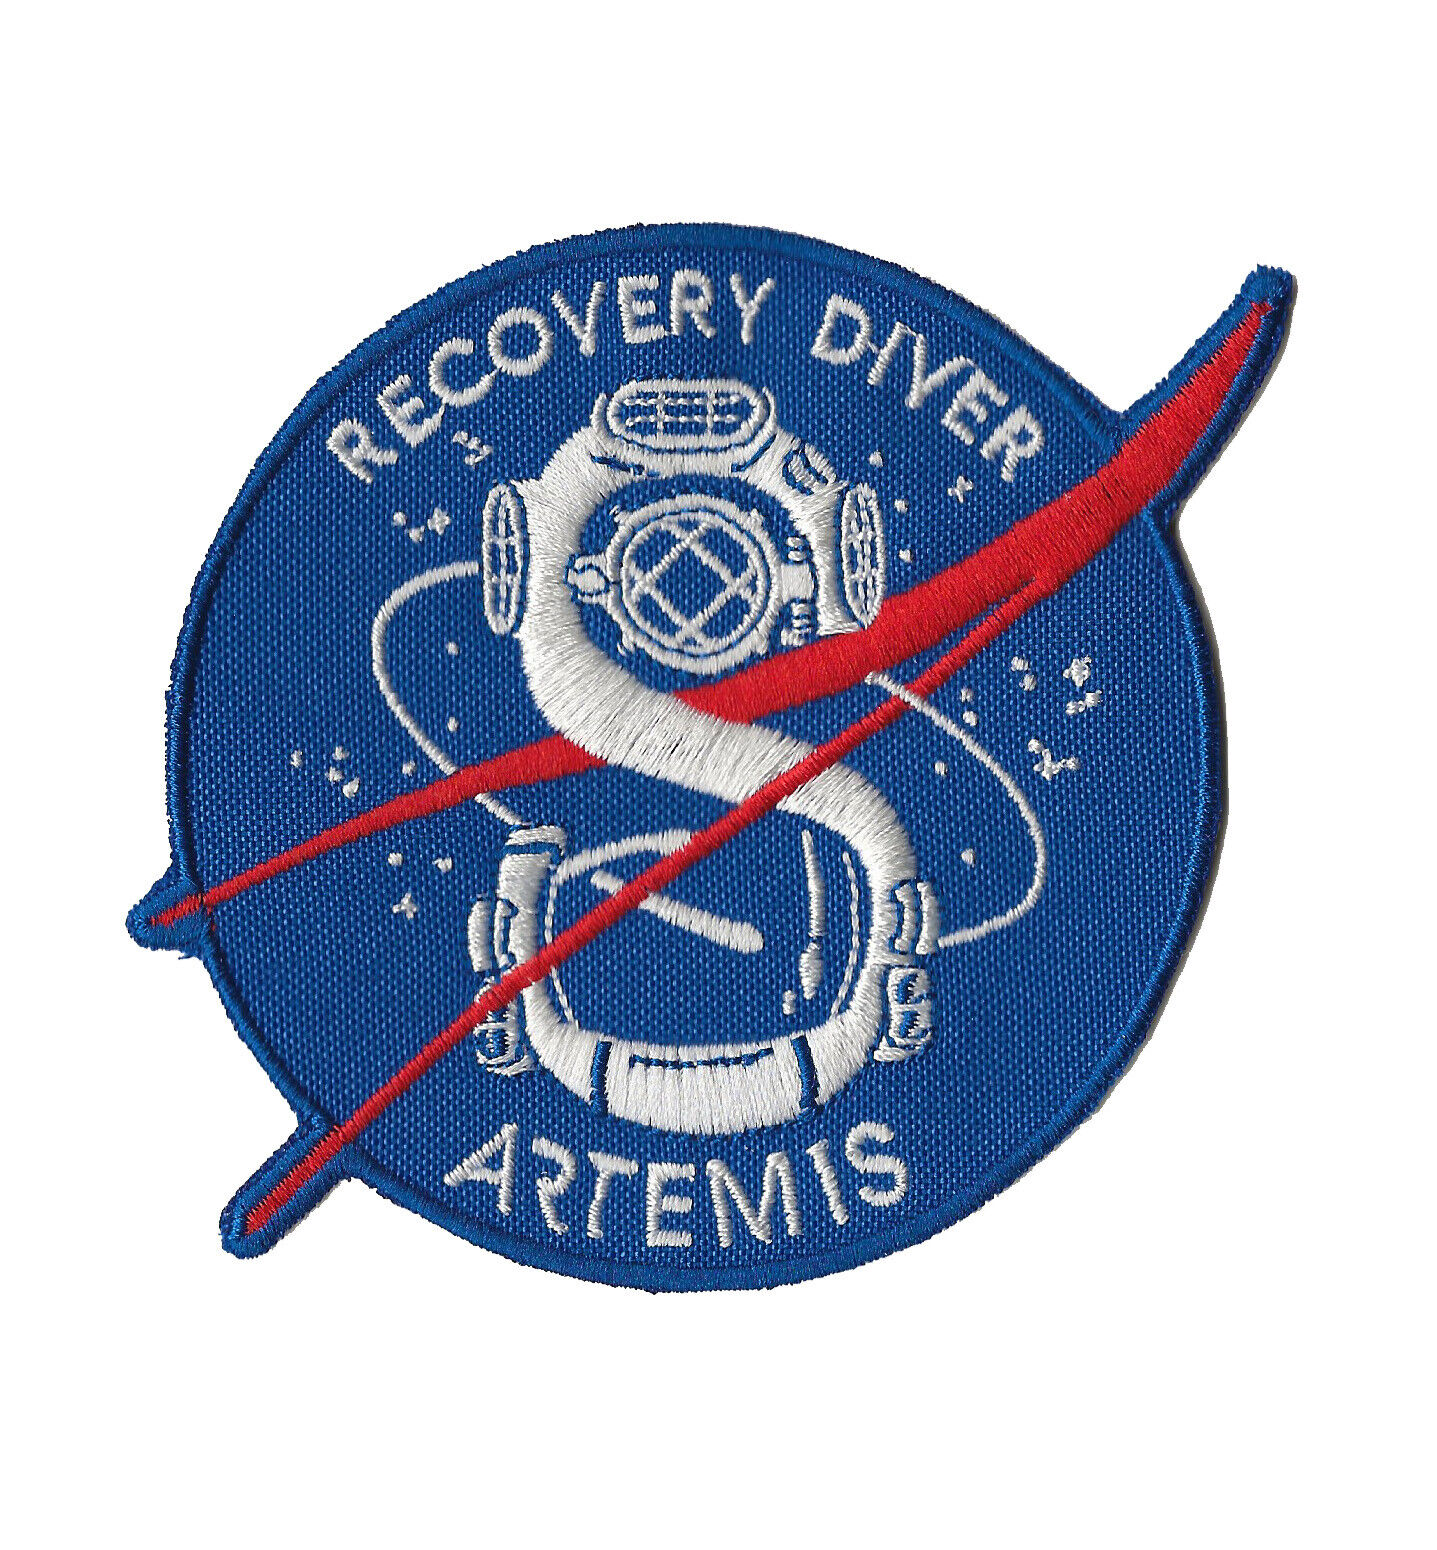  NASA Artemis space program US Navy Recovery Force Diver patch